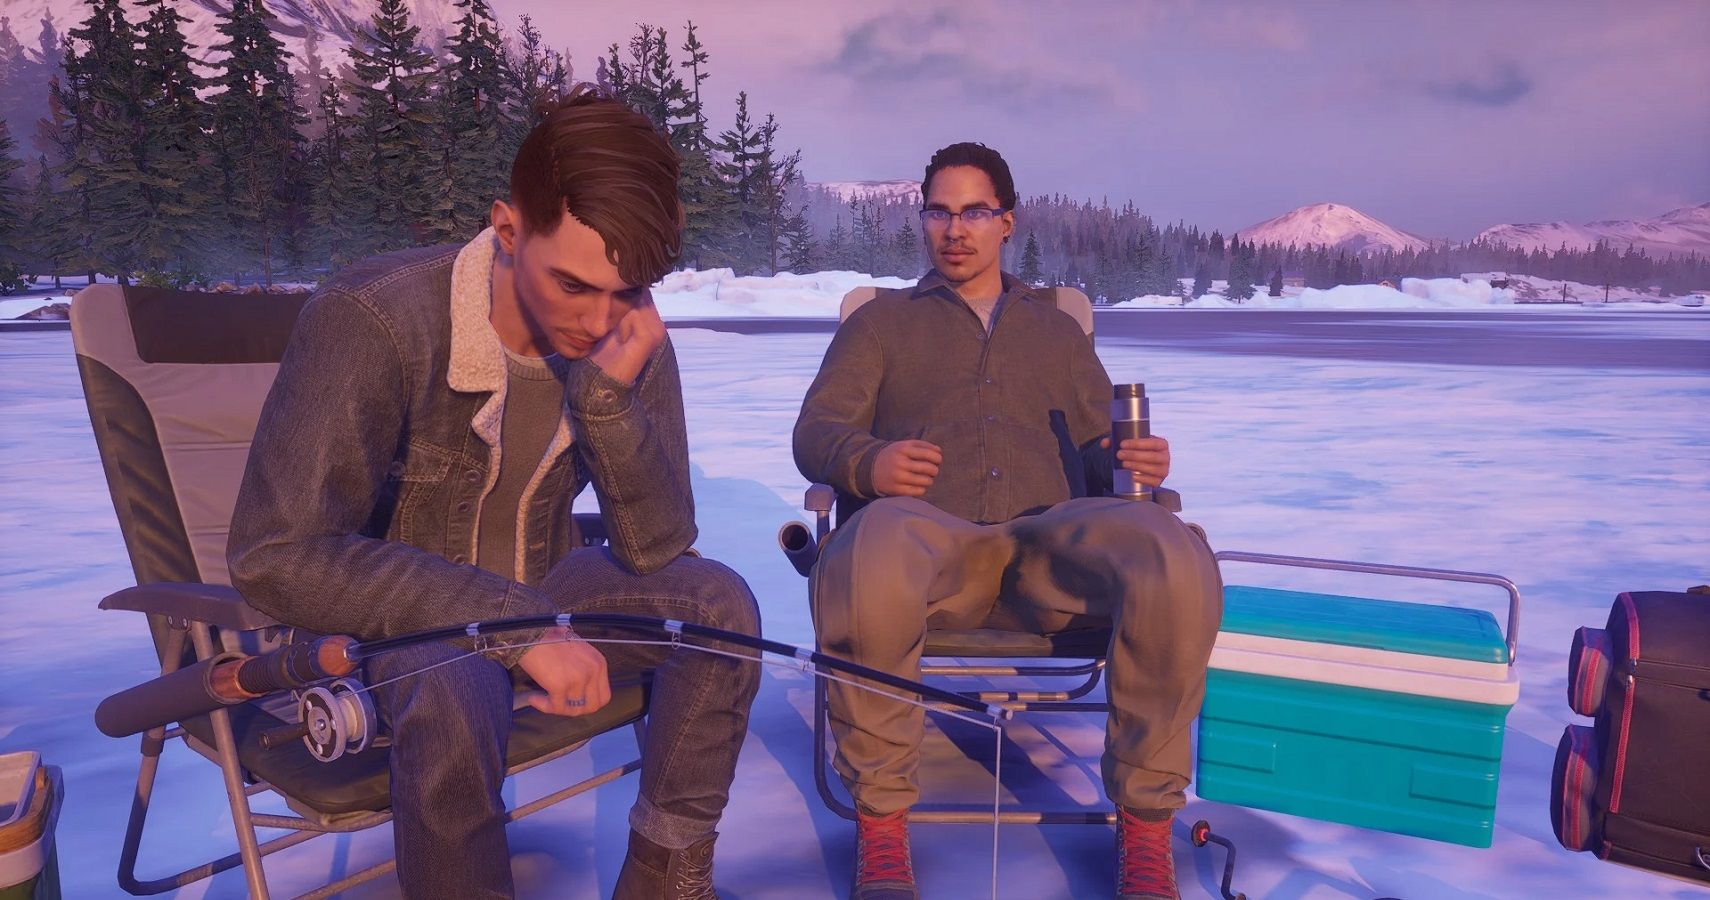 Tell Me Why Tyler and Michael Icefishing on the lake